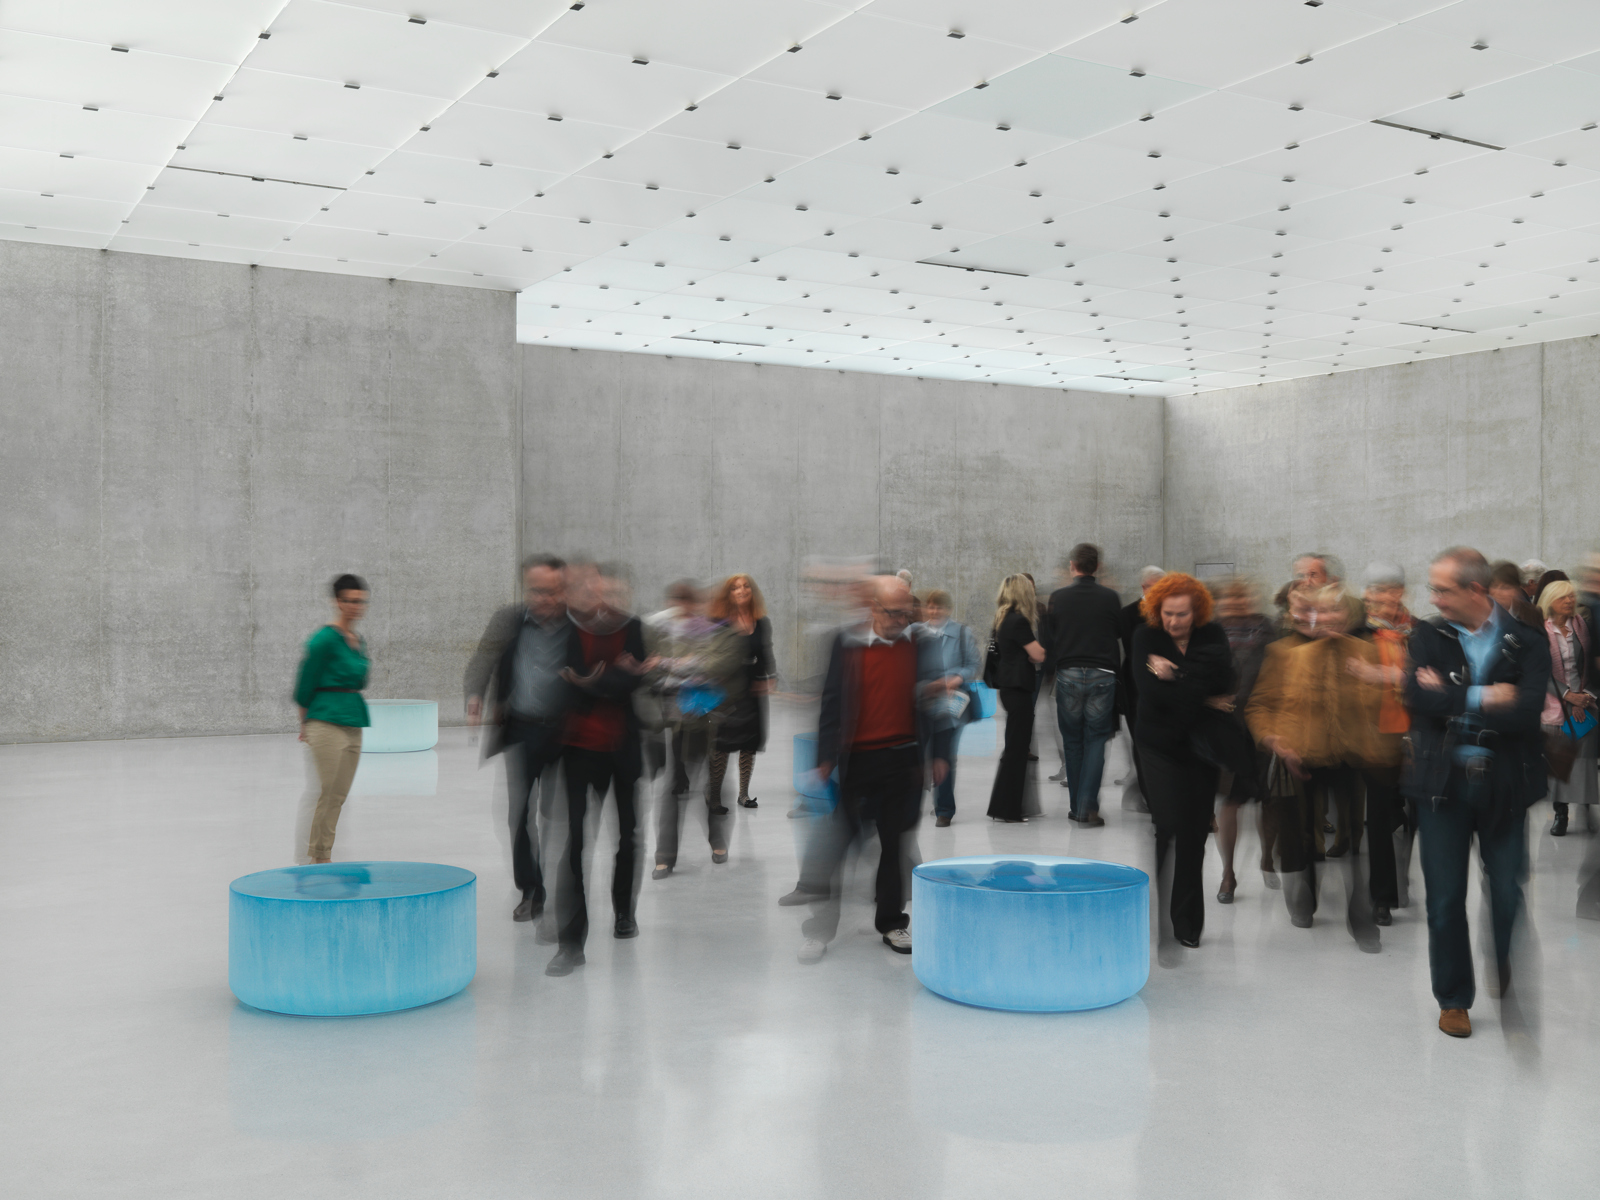 Roni Horn / "Well and Truly", installation view, "Well and Truly", Kunsthaus Bregenz, 2010 / 2010